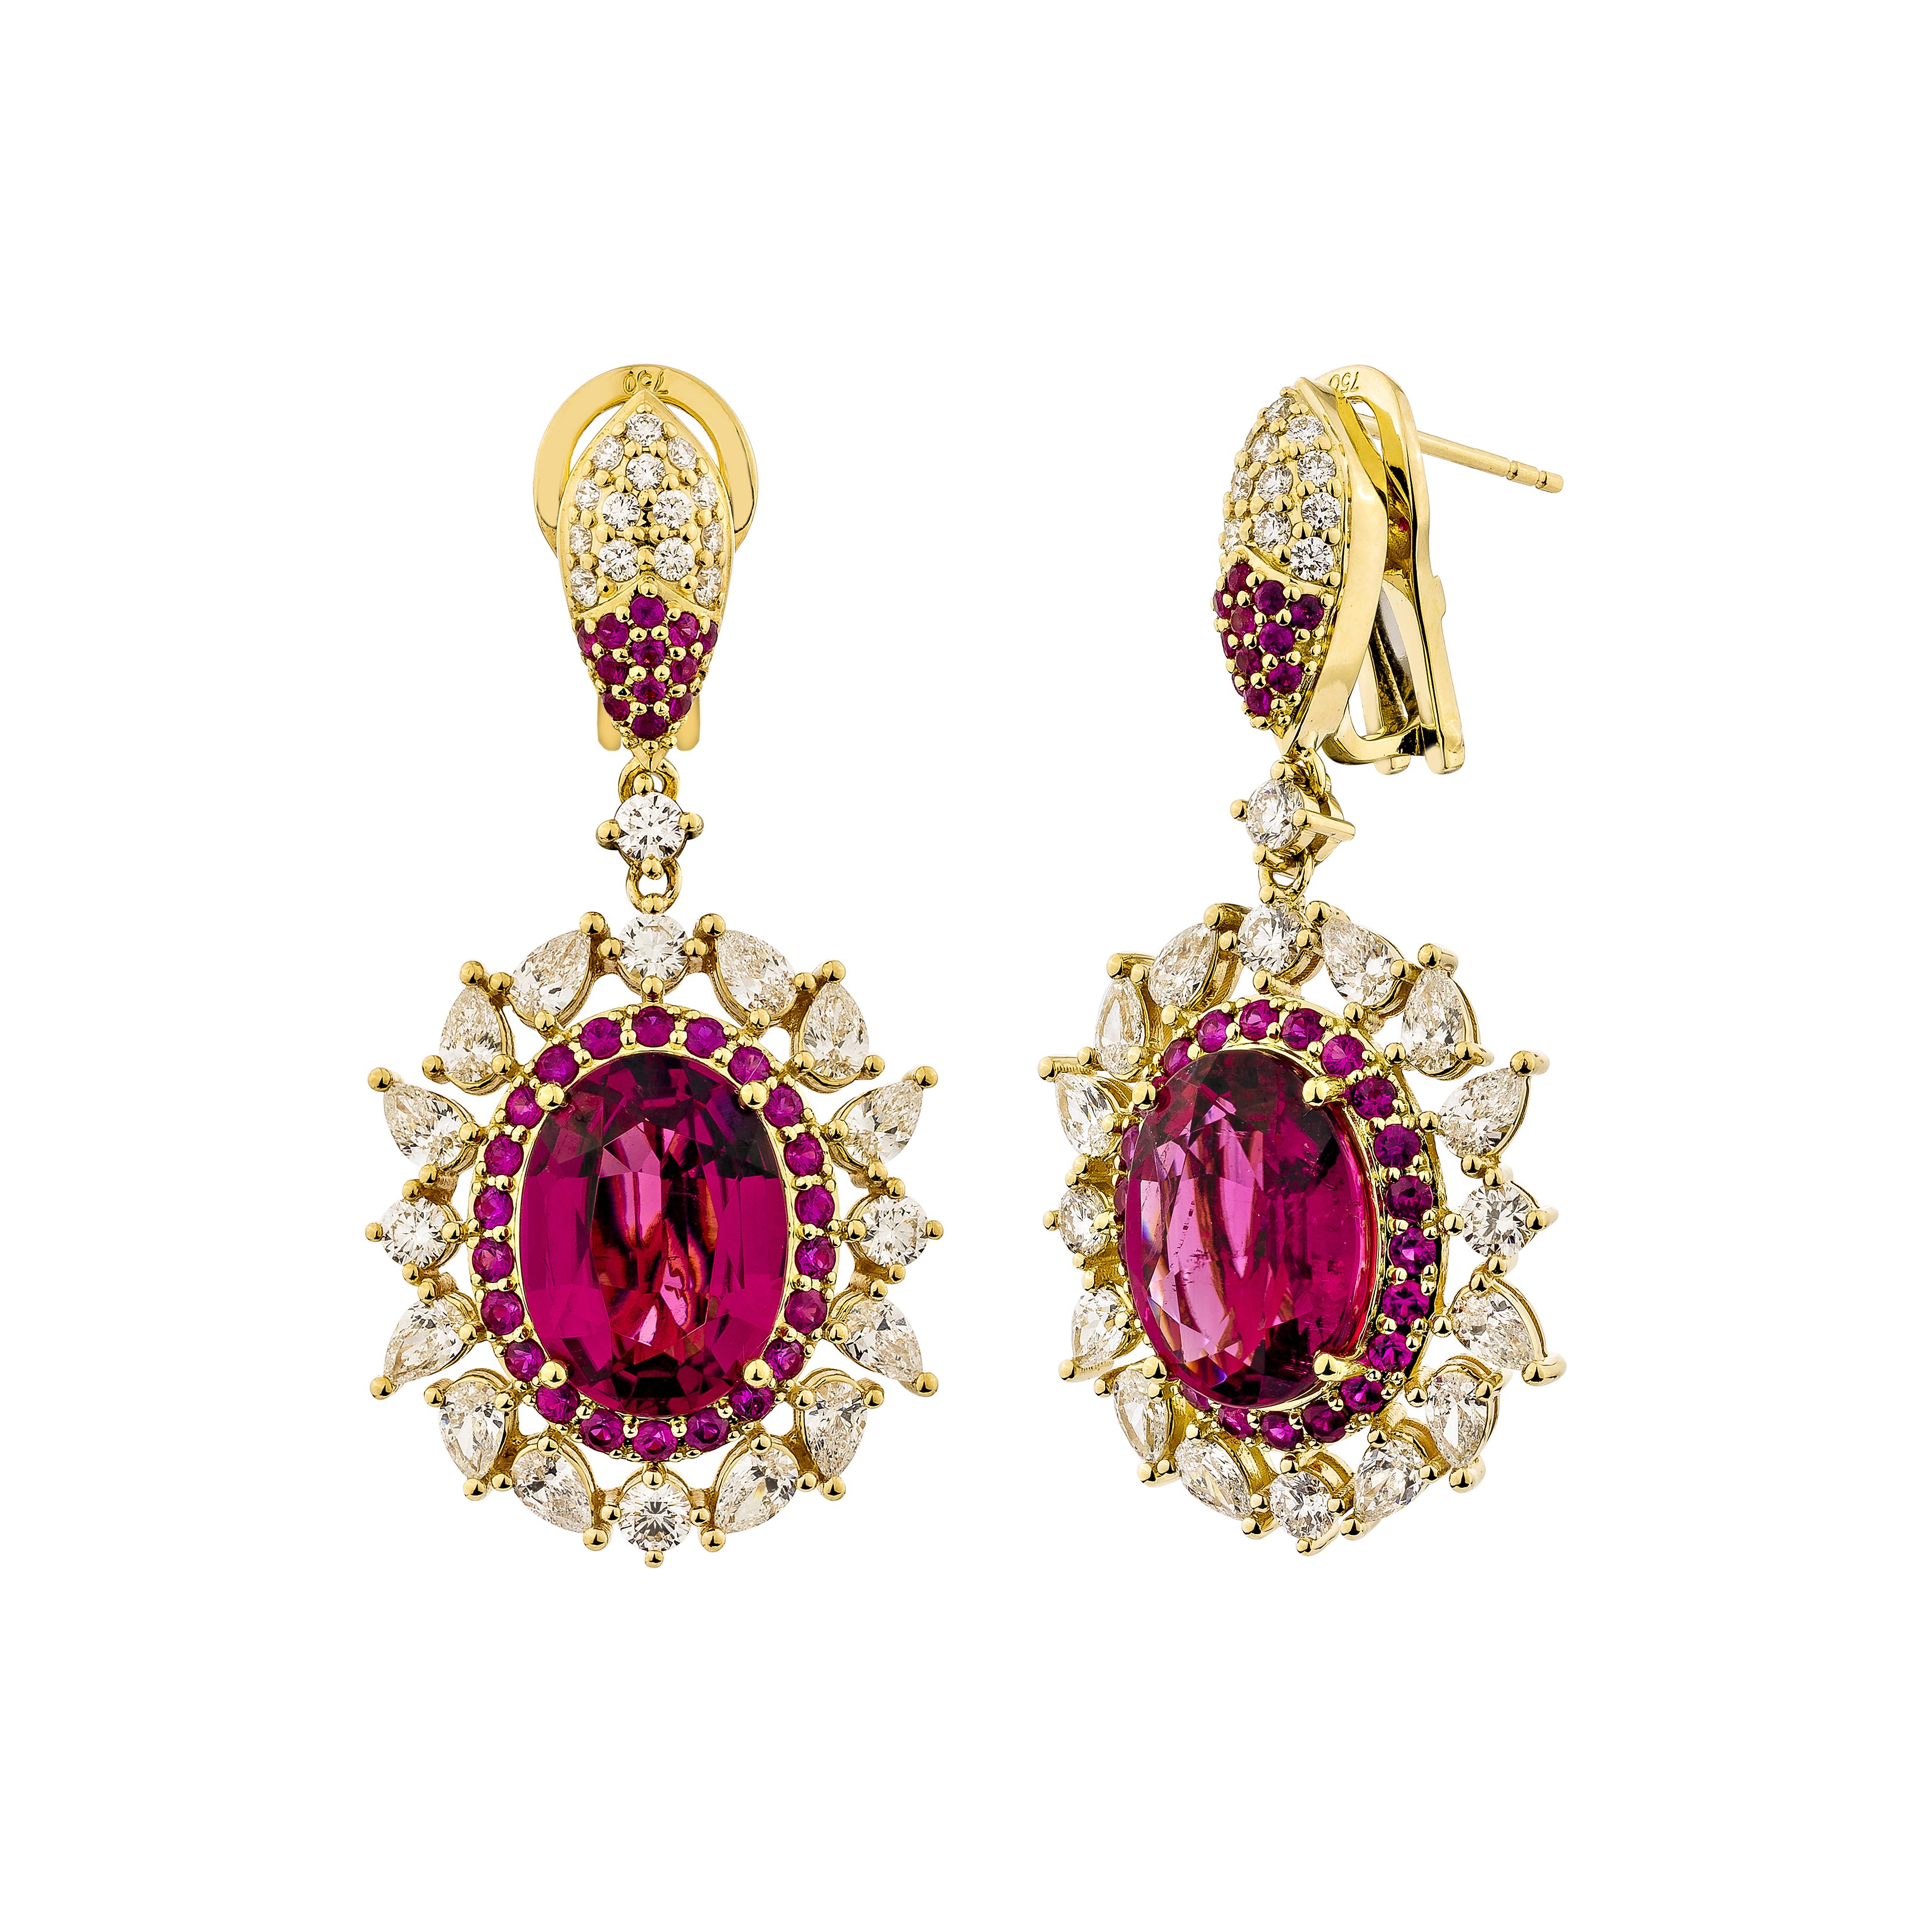 Oval Cut 10.962 Carat Rubellite Drop Earrings in 18KYG with Ruby and White Diamond. For Sale